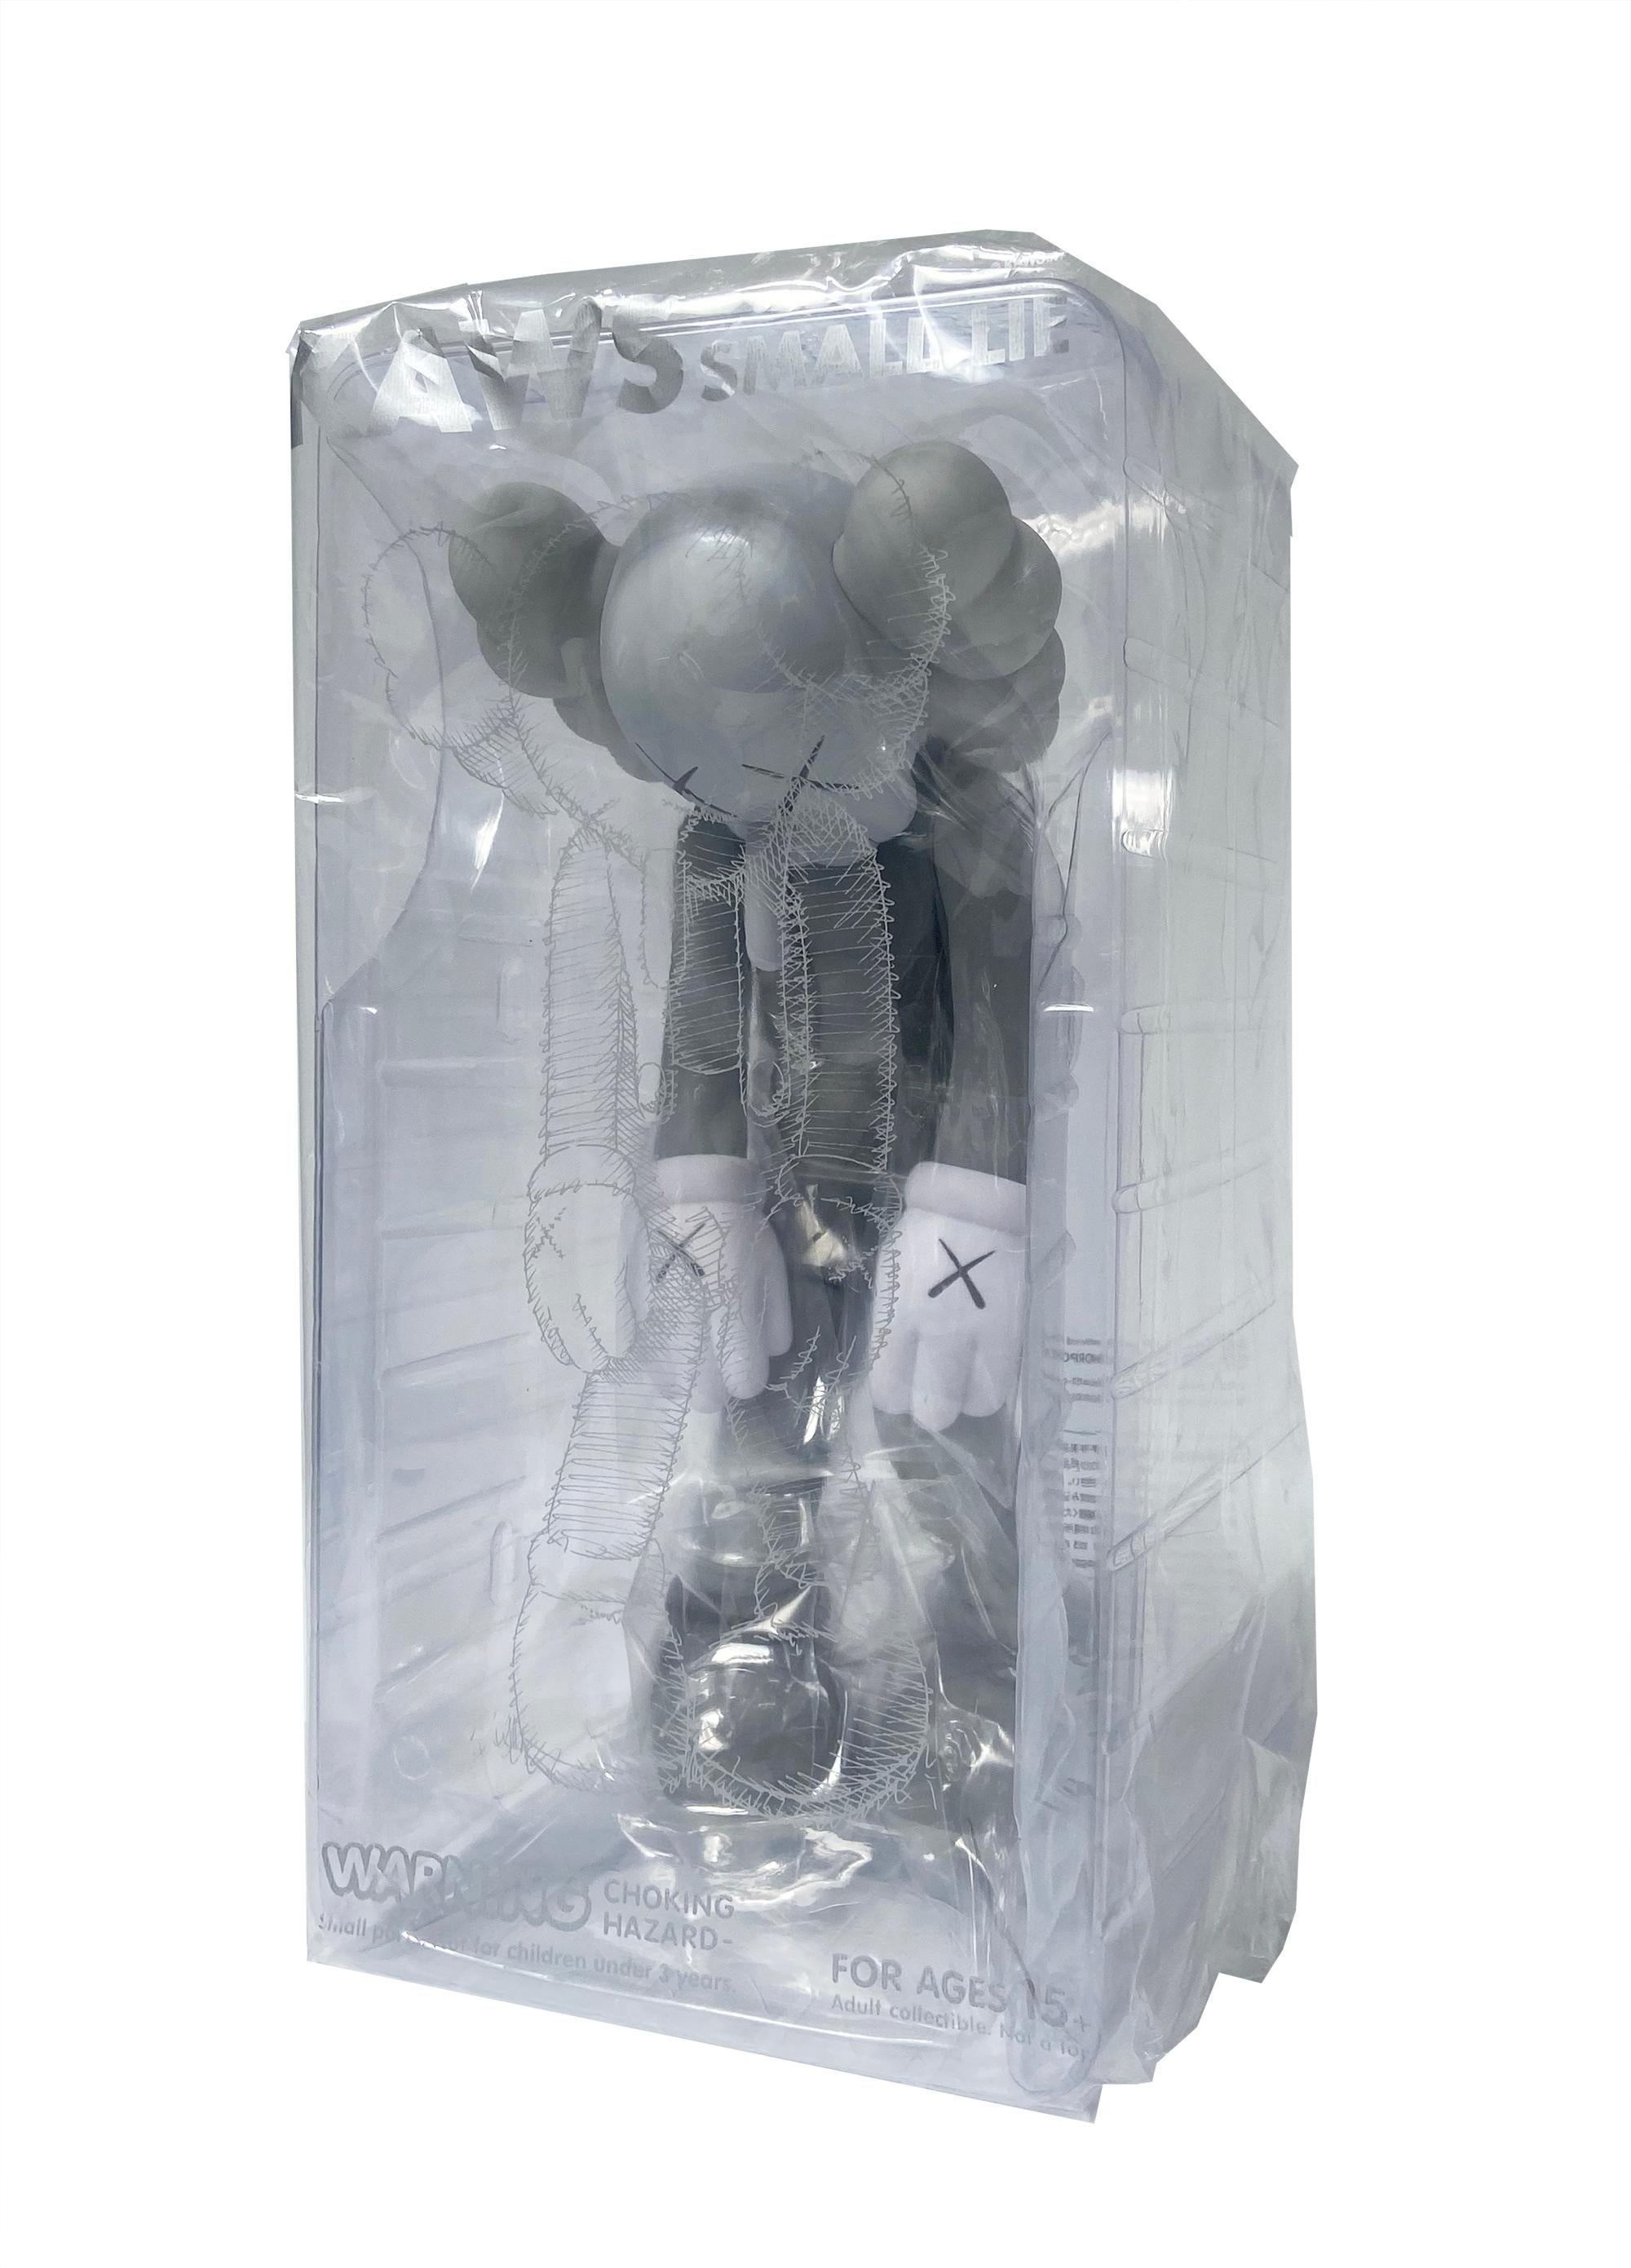 KAWS Small Lie Companion: Set of 2 works (brown and grey). Each new and sealed in their original packaging. 

Among KAWS’s signature “Companions,” Small Lie has the most childlike resonance. Clothed in overall shorts, the Pinocchio-inspired figure